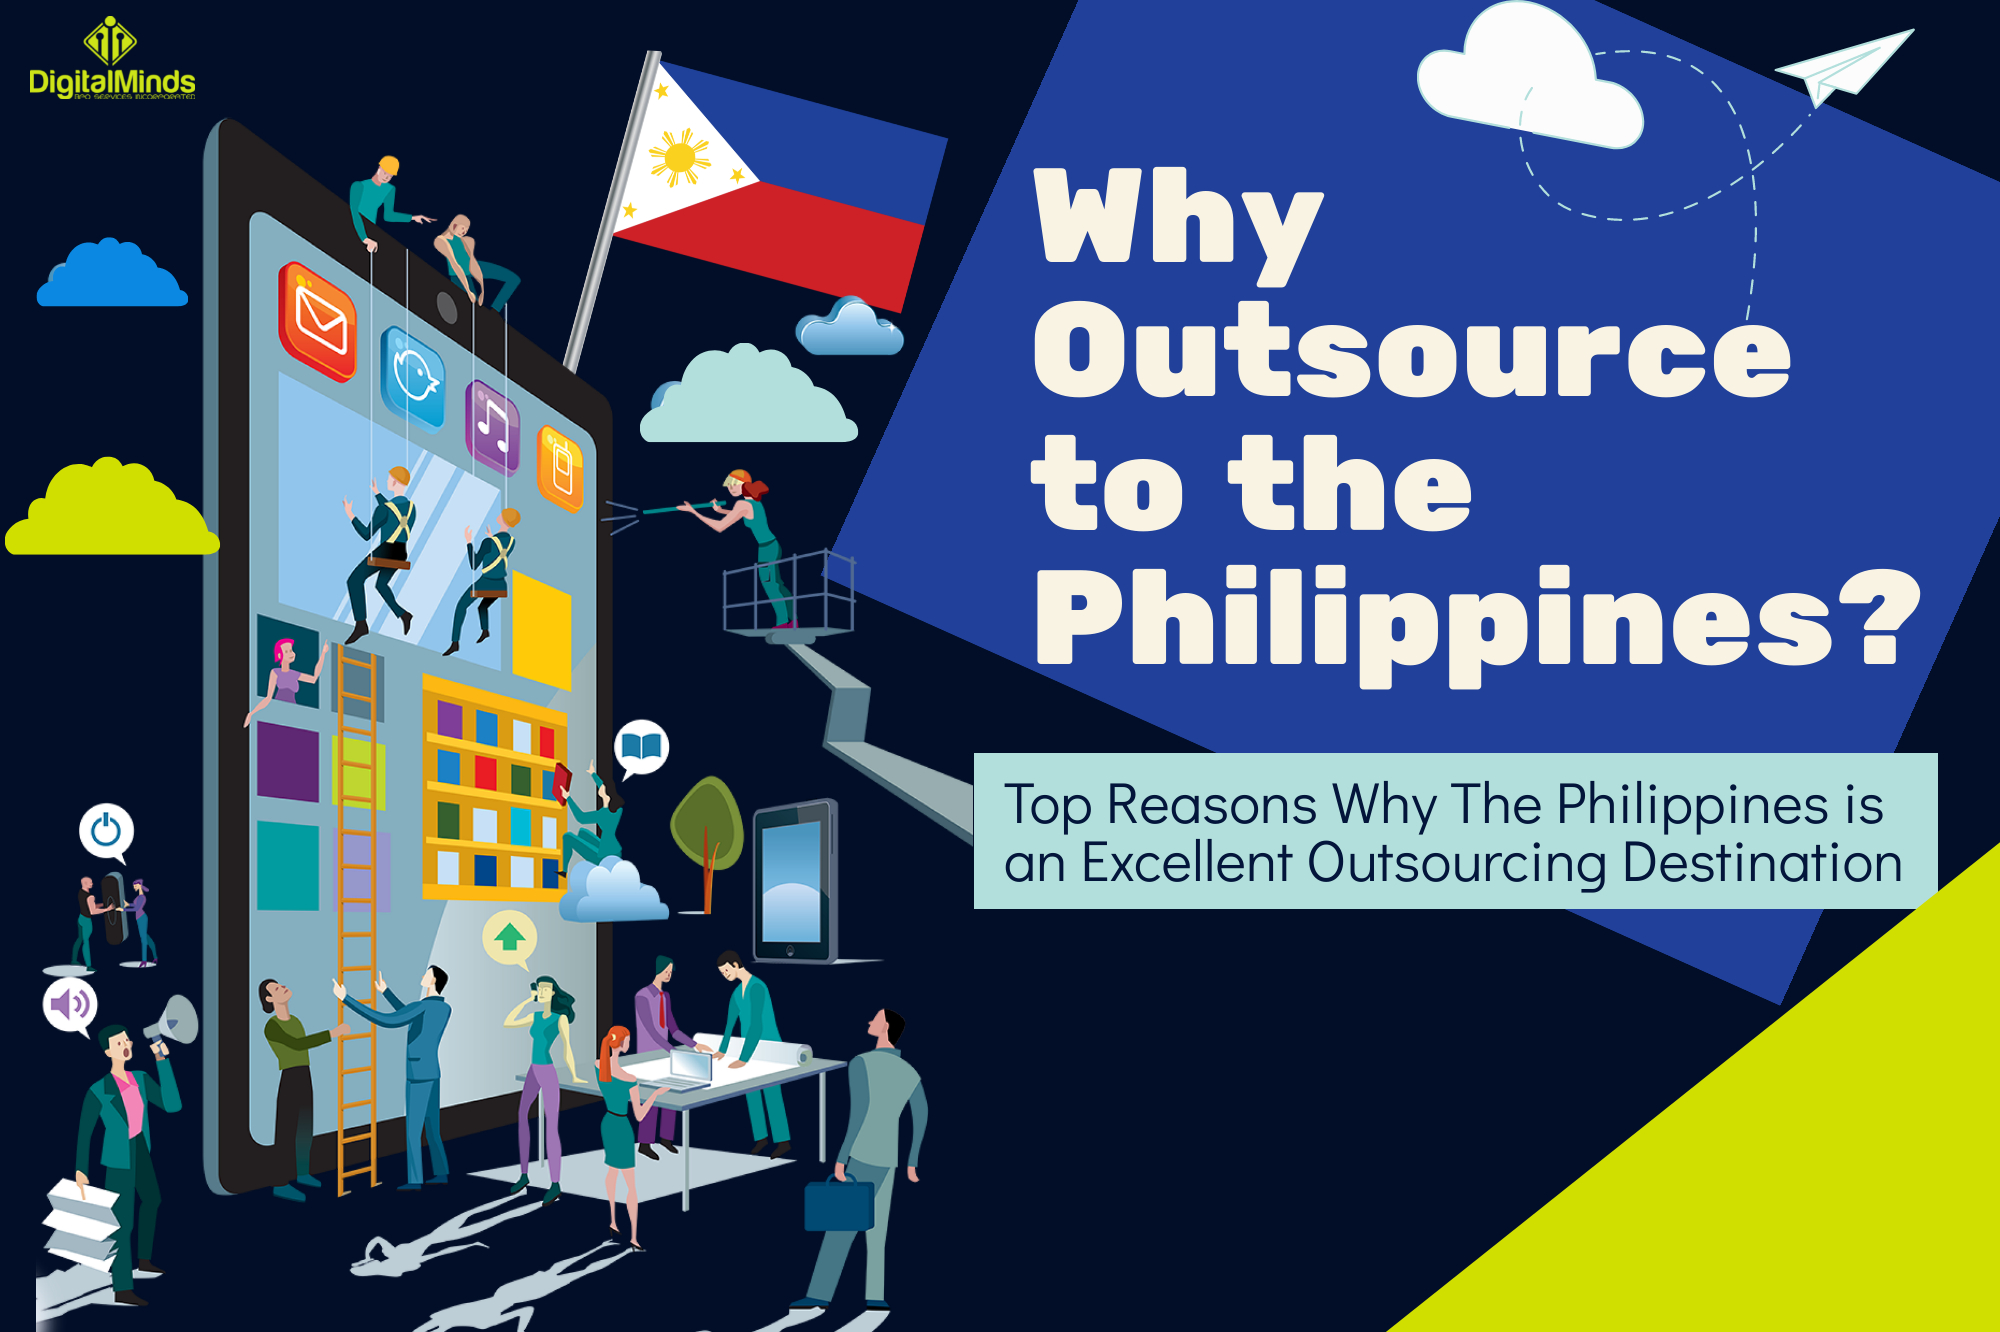 Why outsourcing to the philippines? top reasons why the philippines is a great outsourcing destination.